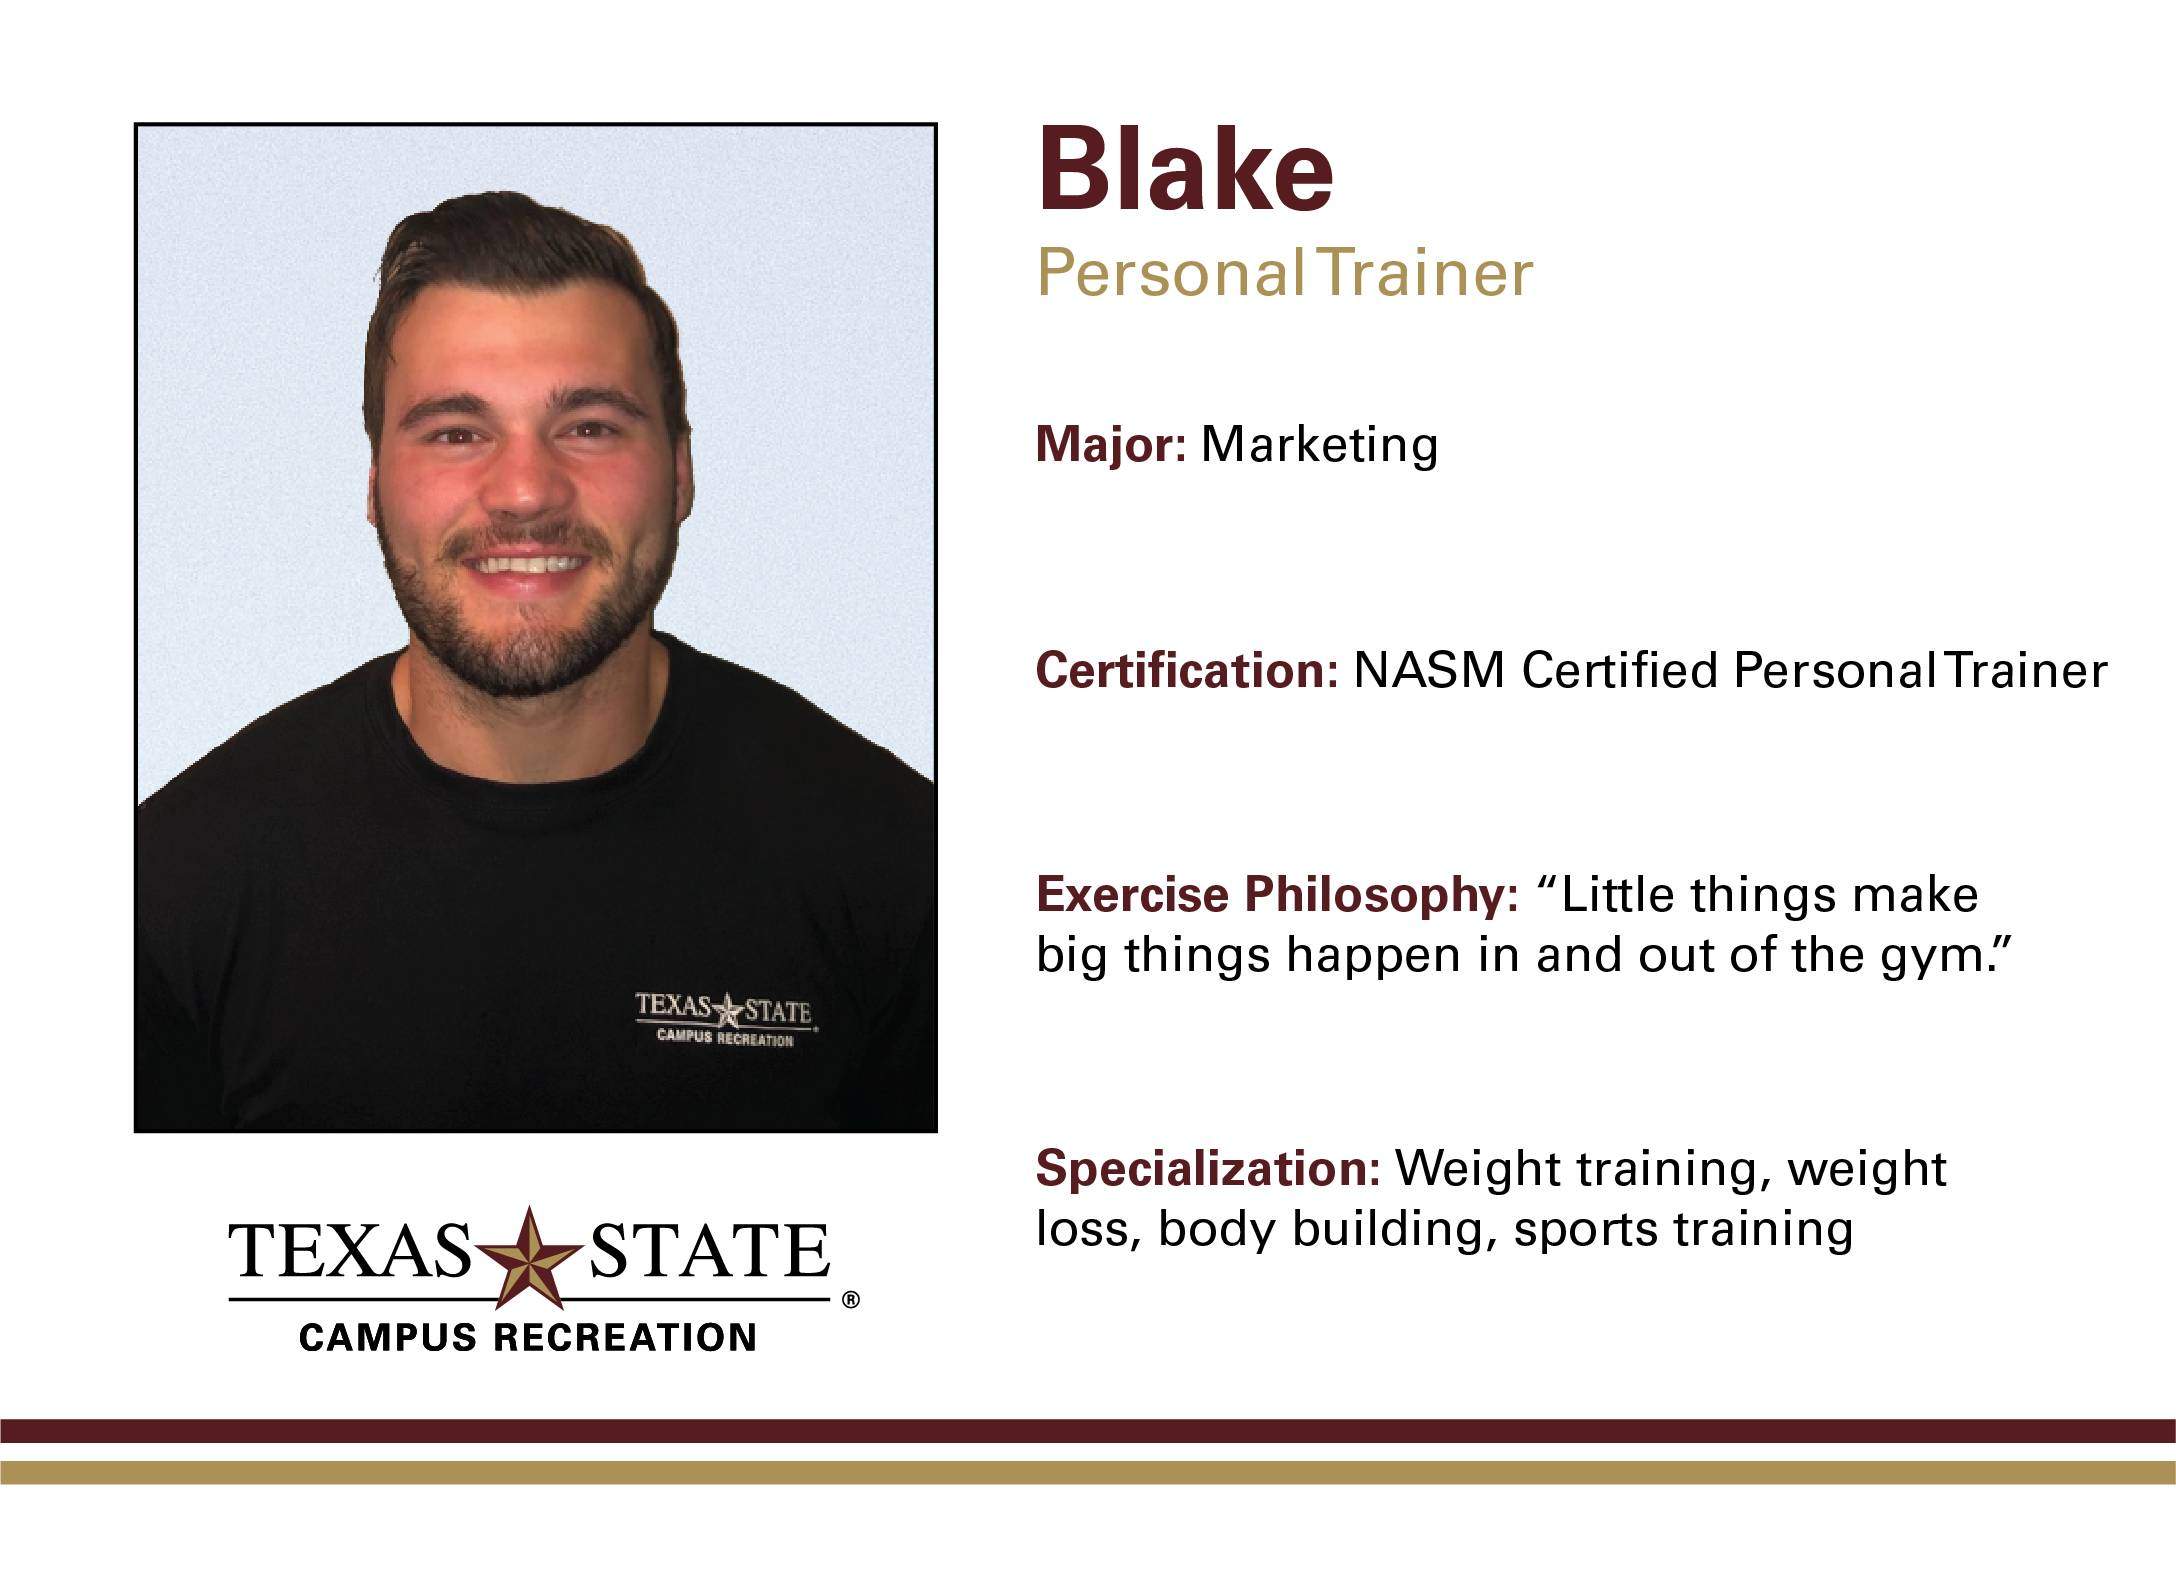 Blake a personal trainer at Texas state campus recreation